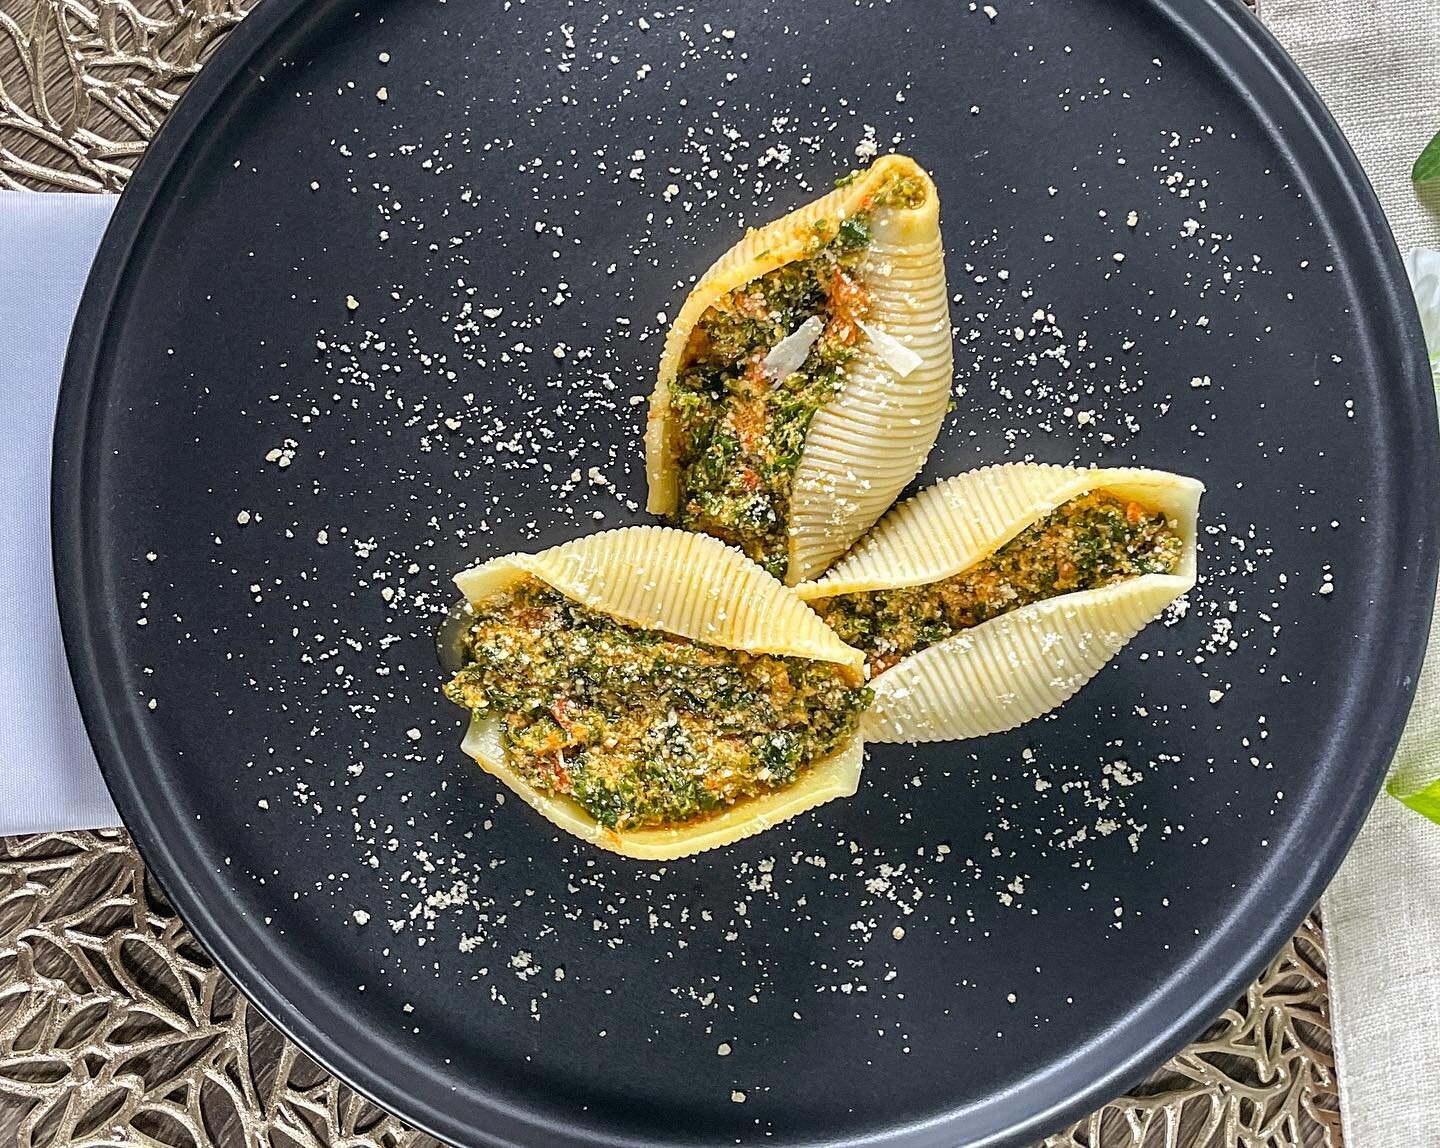 Every plate is a canvas, an epicenter for creation, the beginning of food inspiration. 

What&rsquo;s your canvas? Where does your creativity come to life?

📸: Stuffed Shell W/ Melon Seed &amp; Kale by @chefobioma 
.
.
.
.
.
#art #foodworld #canvas 